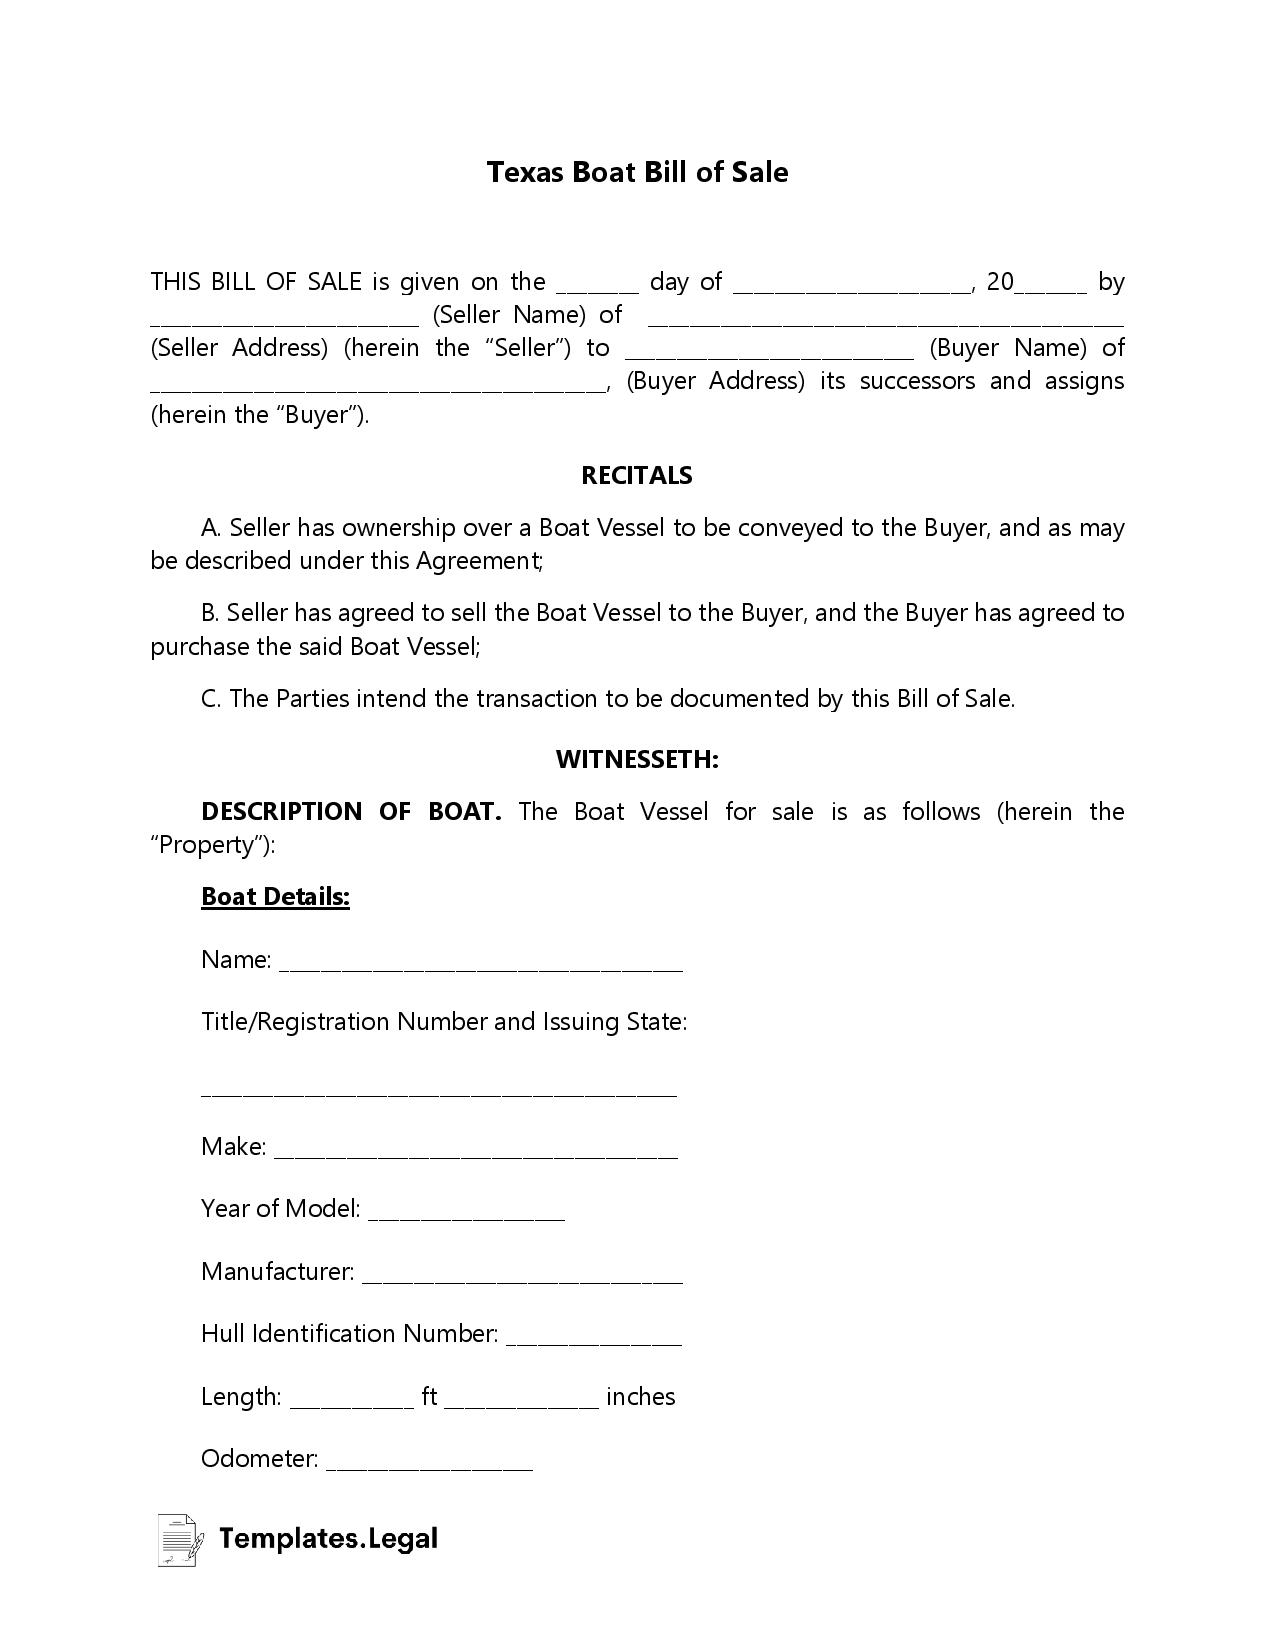 Texas Boat Bill of Sale - Templates.Legal